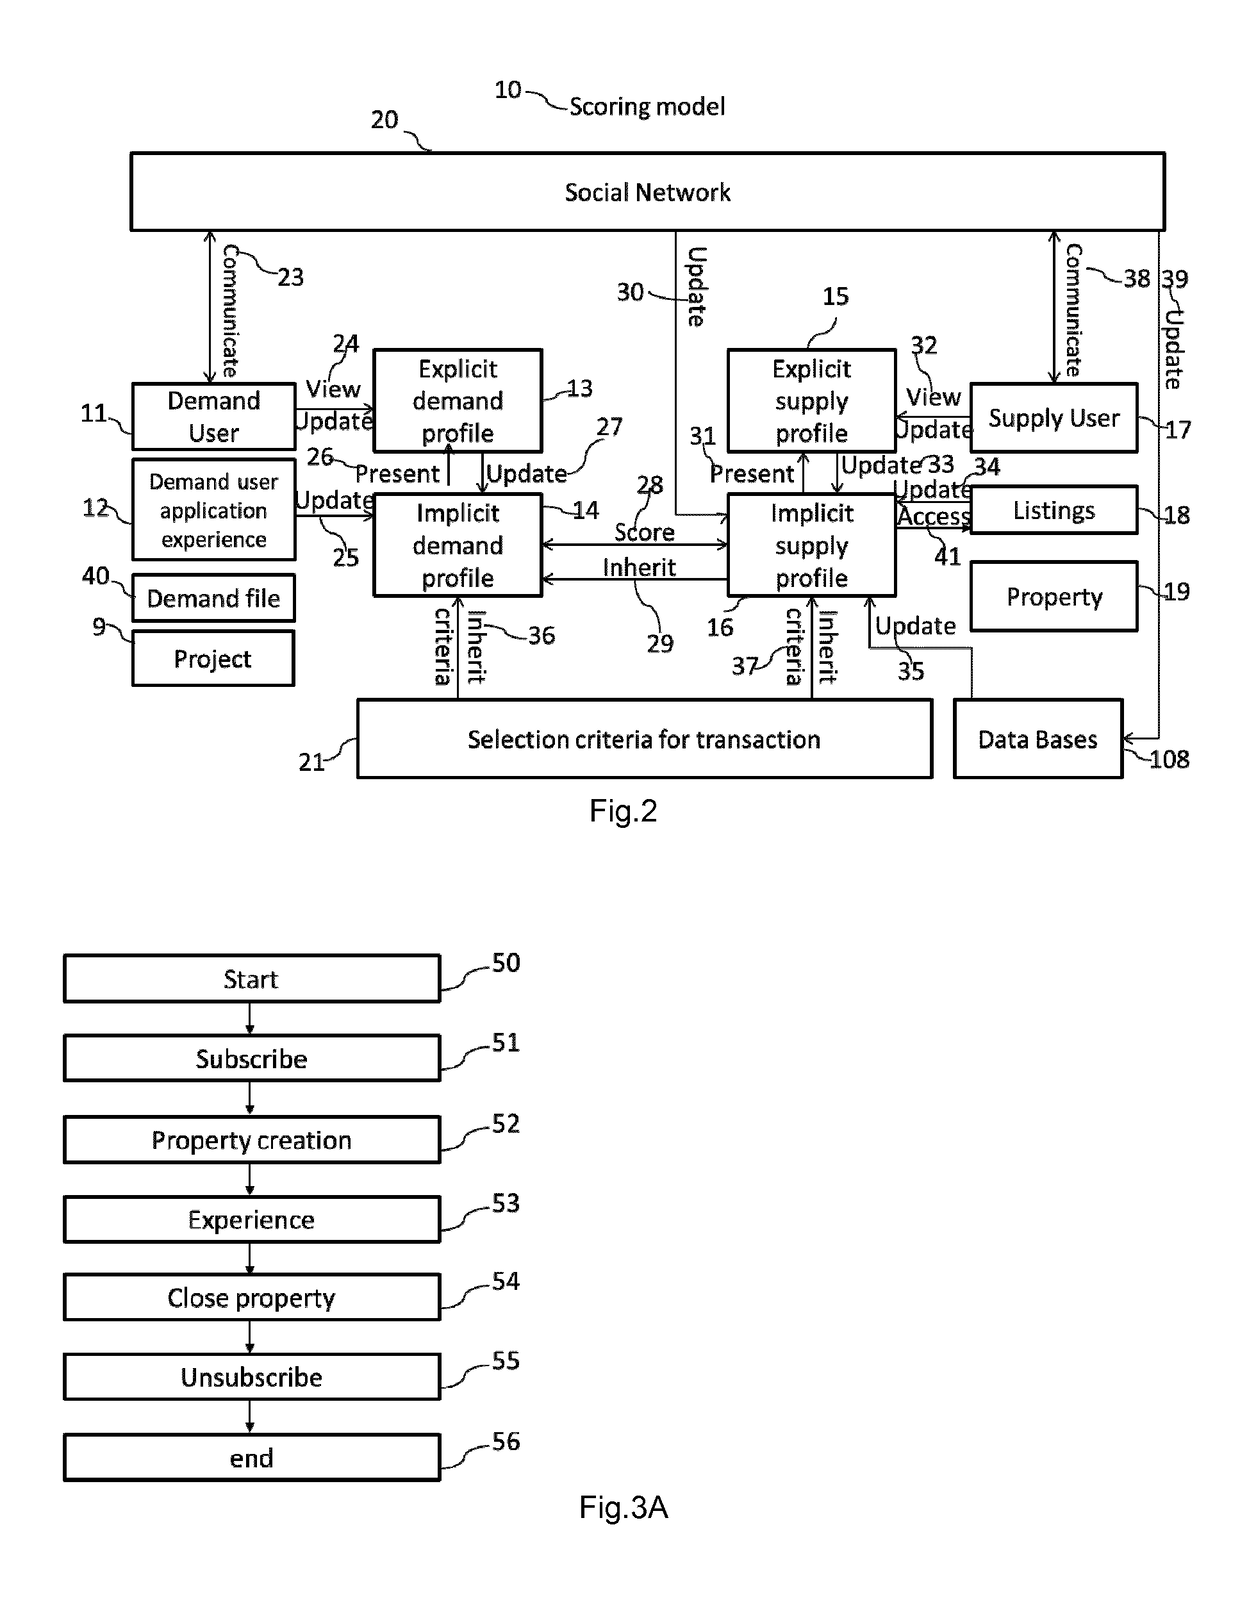 Process for computing a score for a search engine used for accessing a database of real estate properties